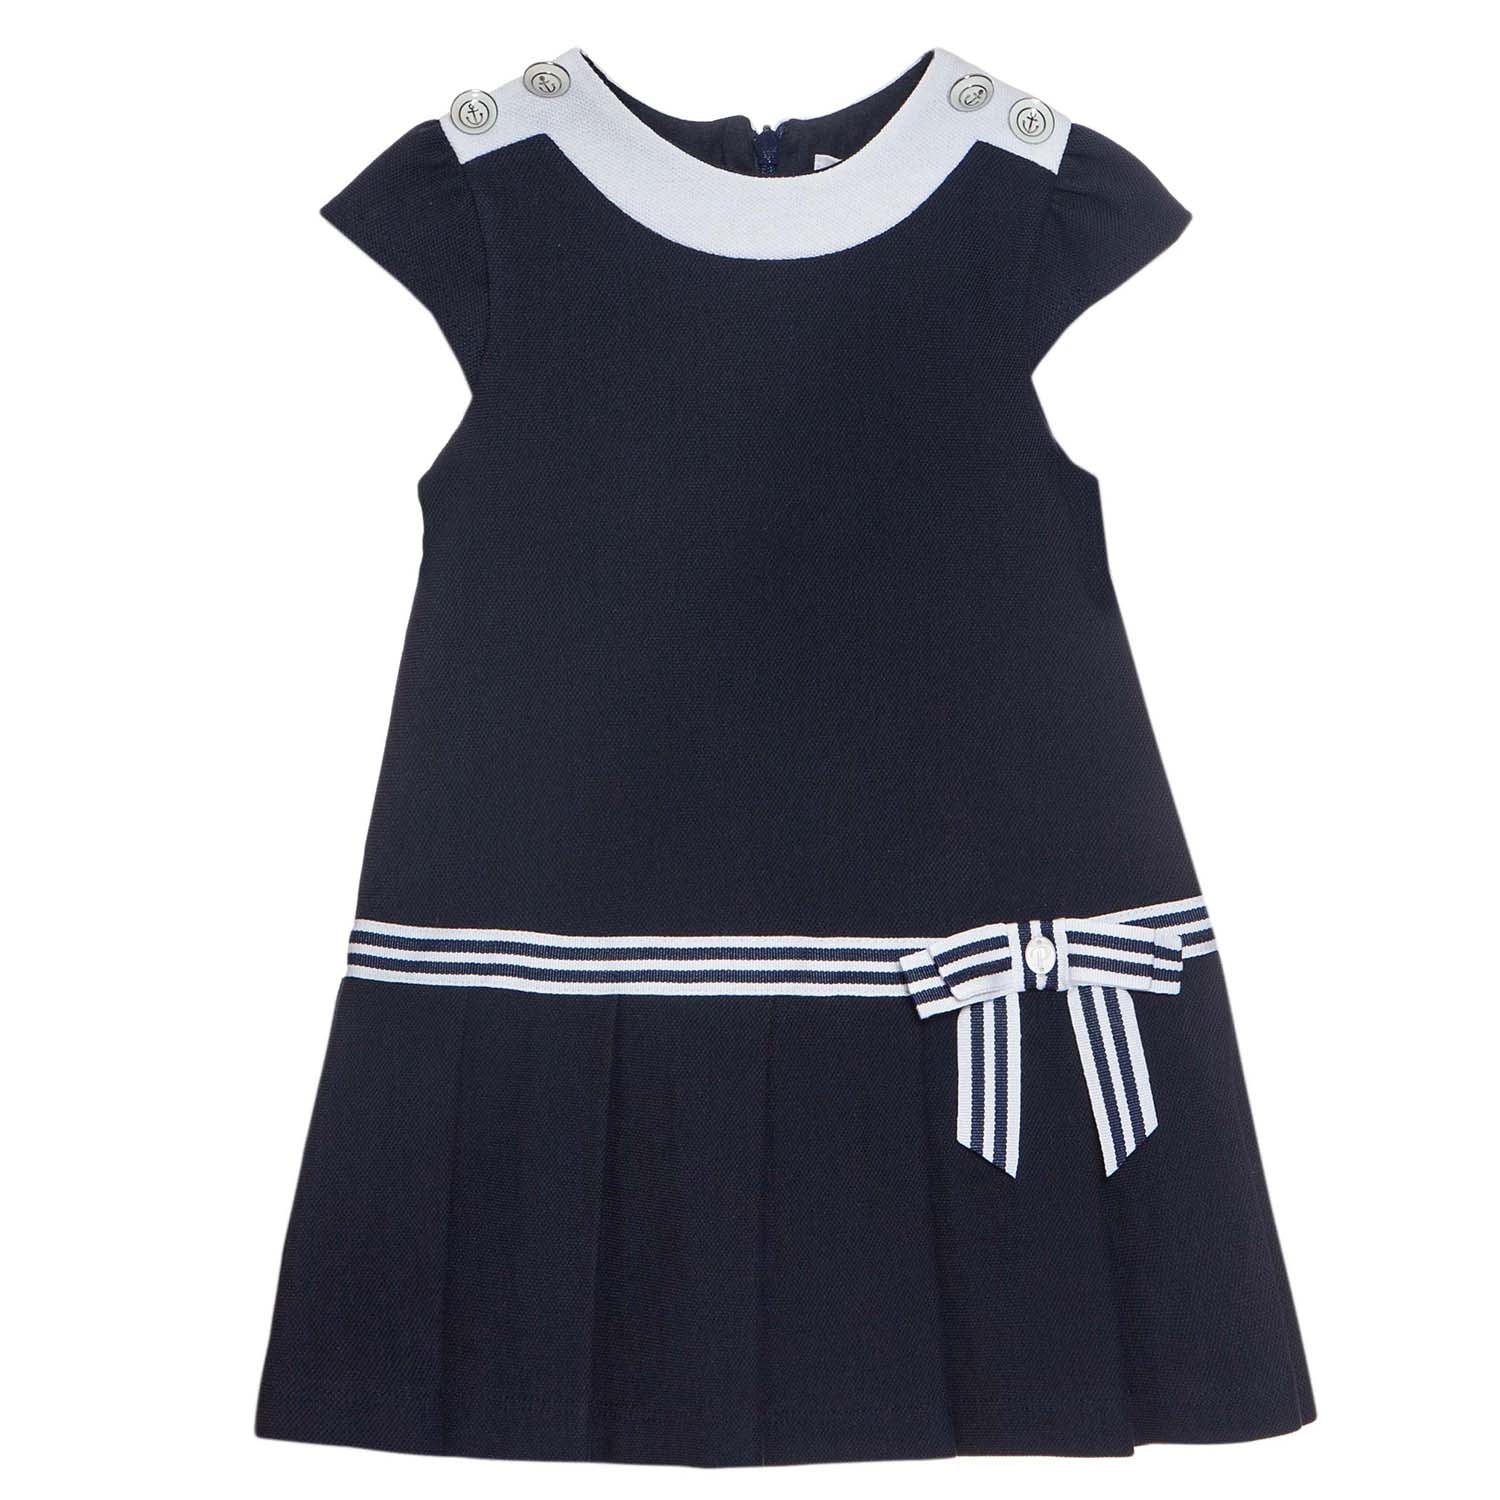 Navy And White Pleat Dress